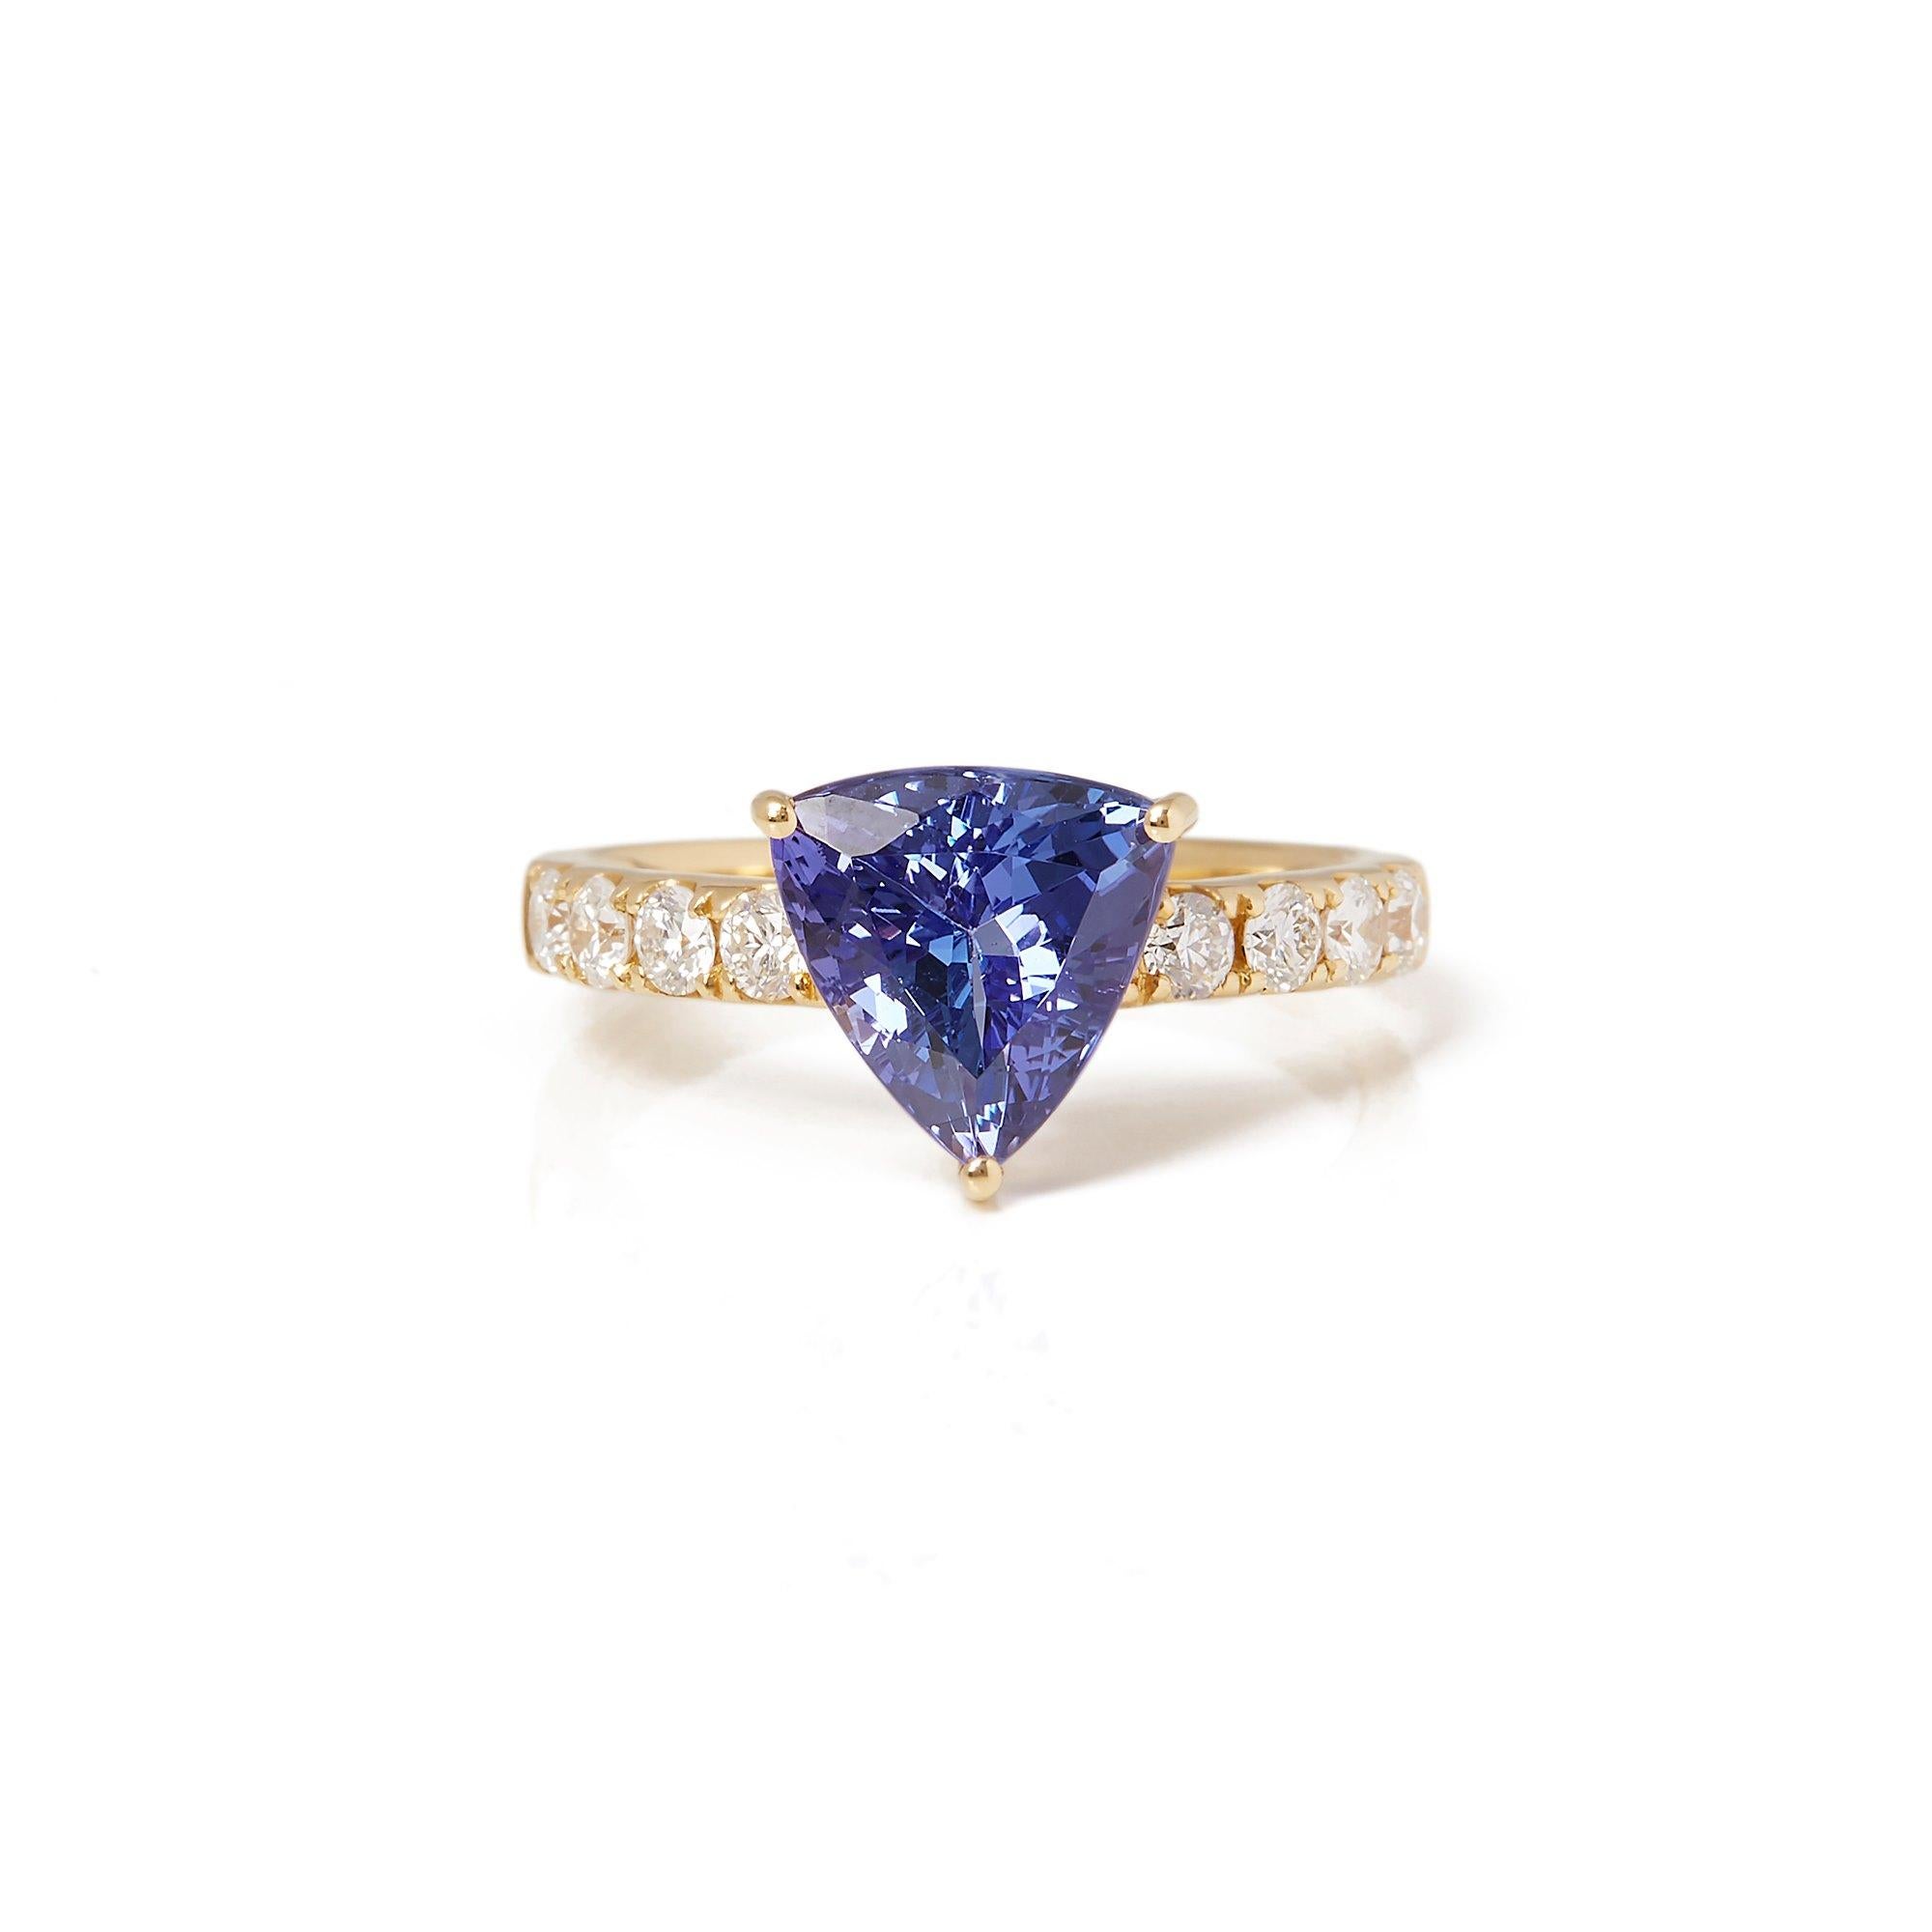 This ring designed by David Jerome is from his private collection and features one trilliant cut Tanzanite totalling 2.82cts sourced in the D block mine Tanzania. Set with round brilliant cut Diamonds totalling 0.52cts mounted in an 18k yellow gold